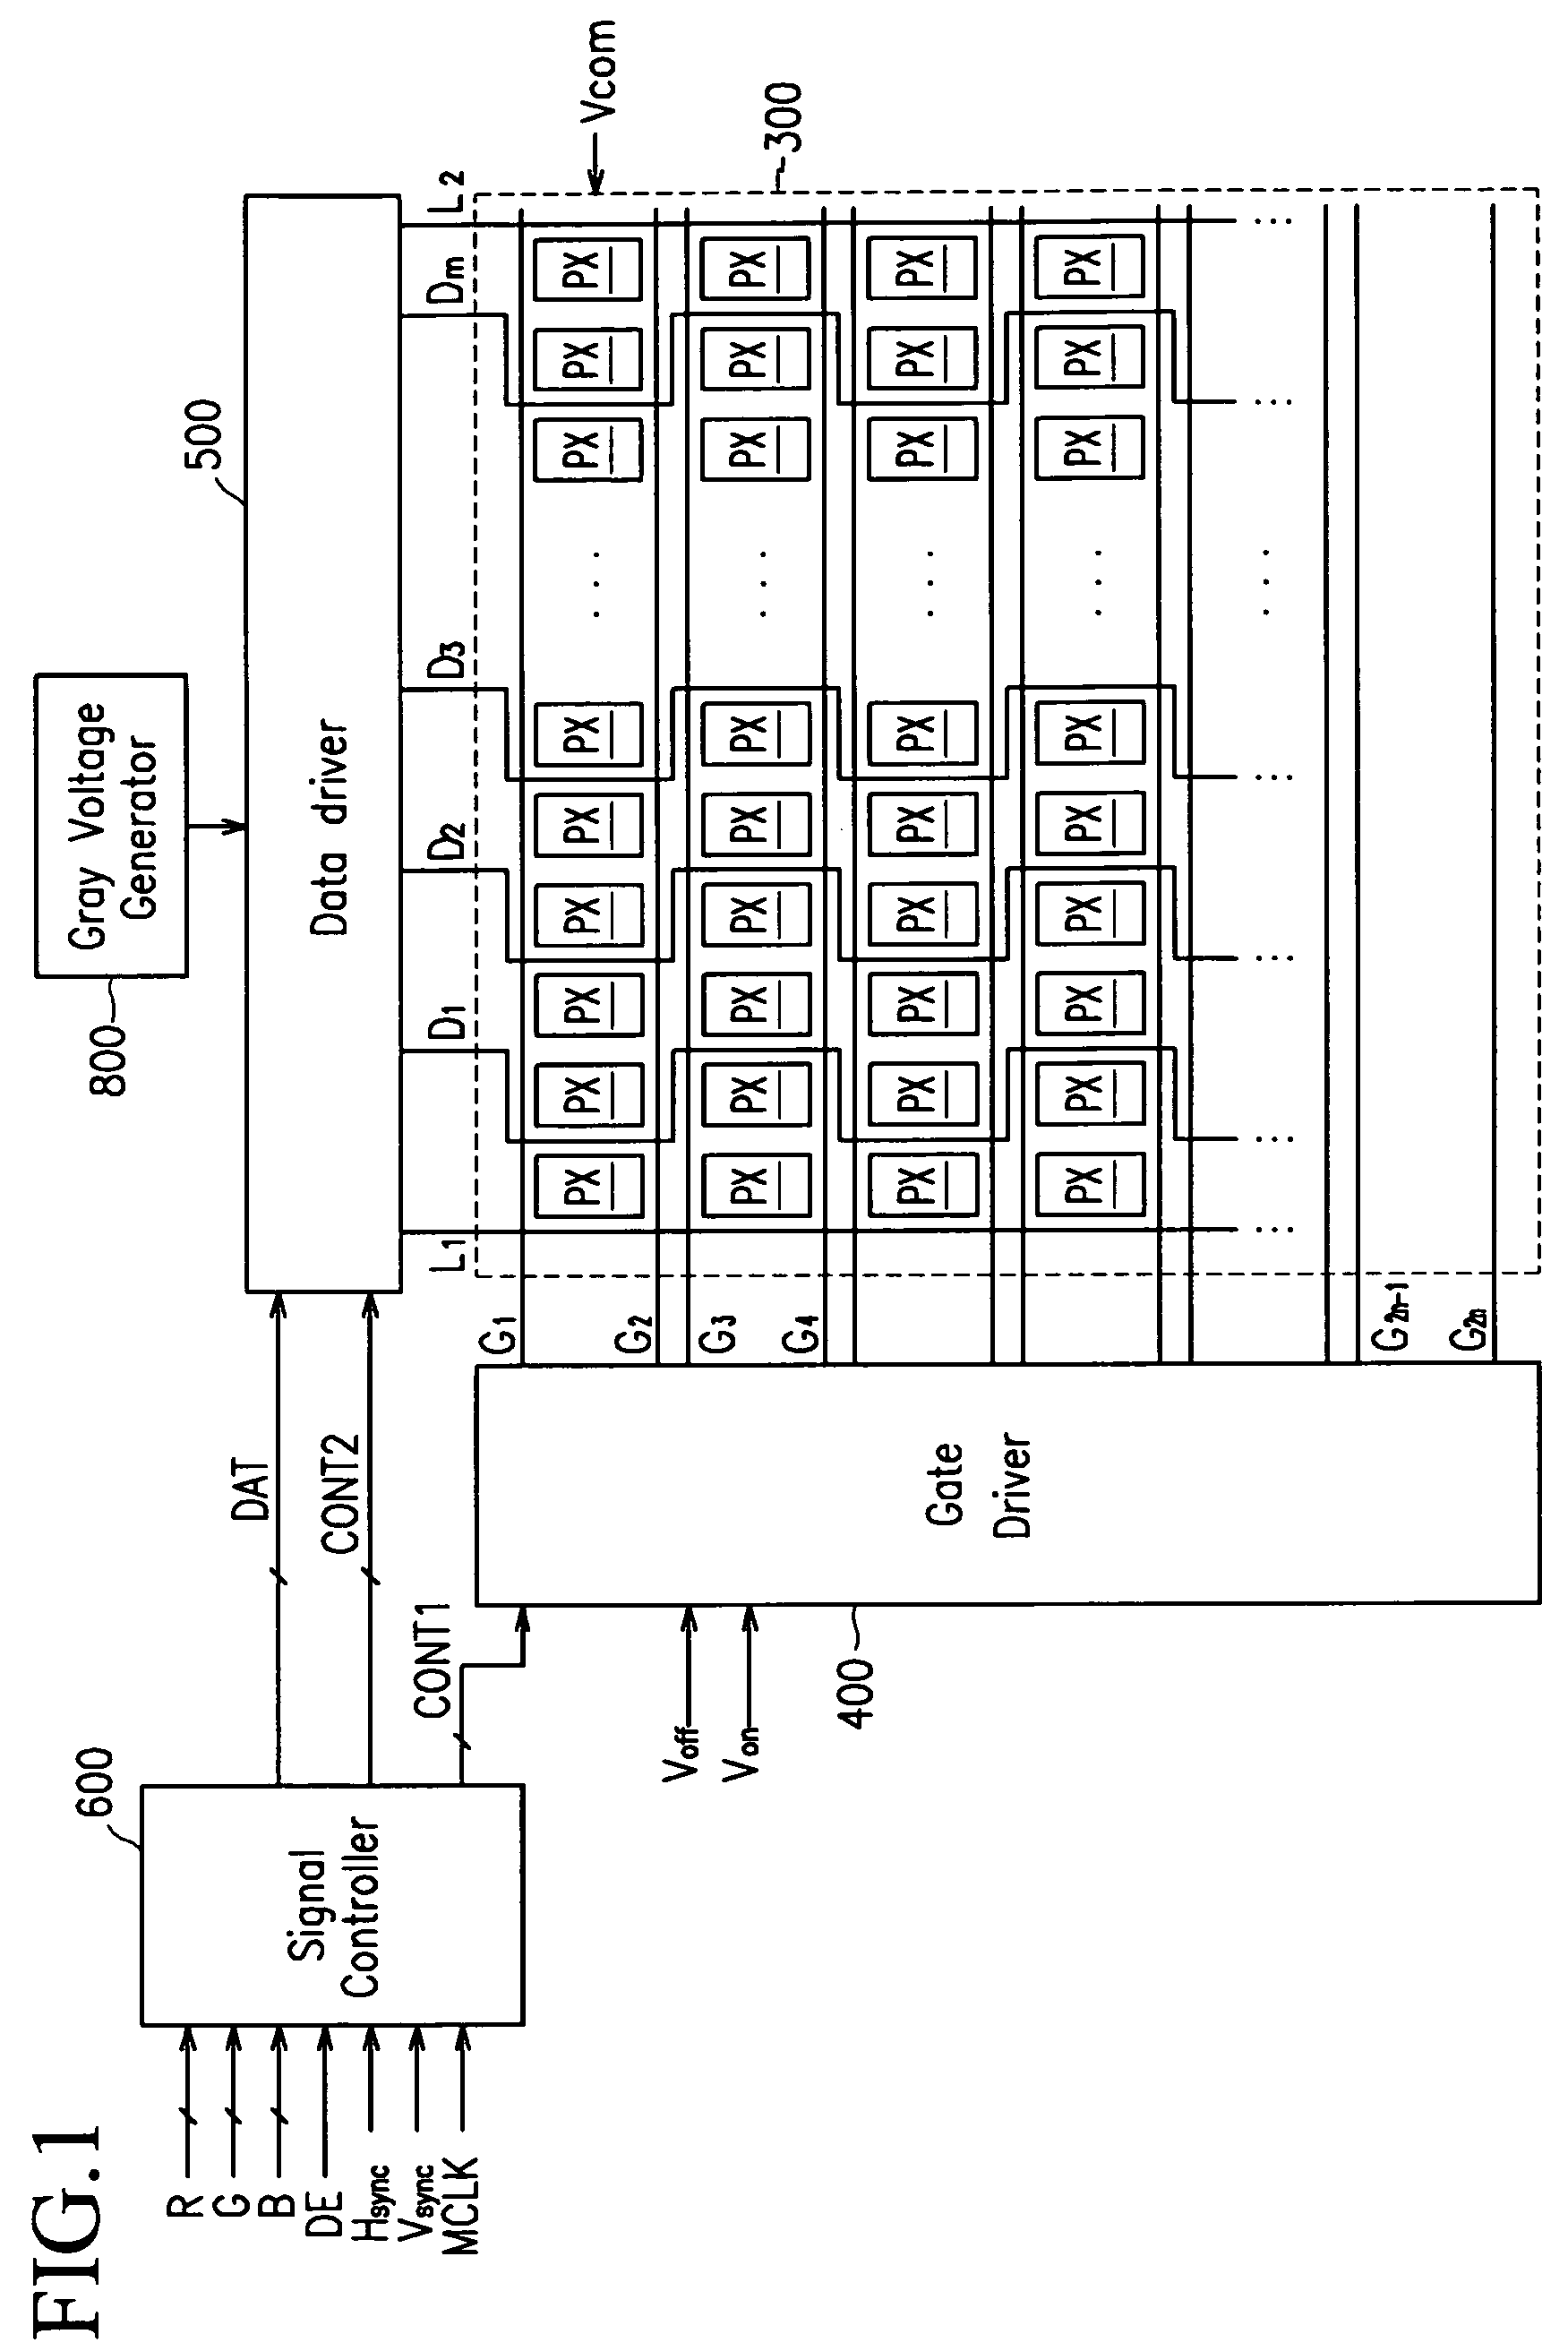 Thin film transistor array panel and display device having particular data lines and pixel arrangement